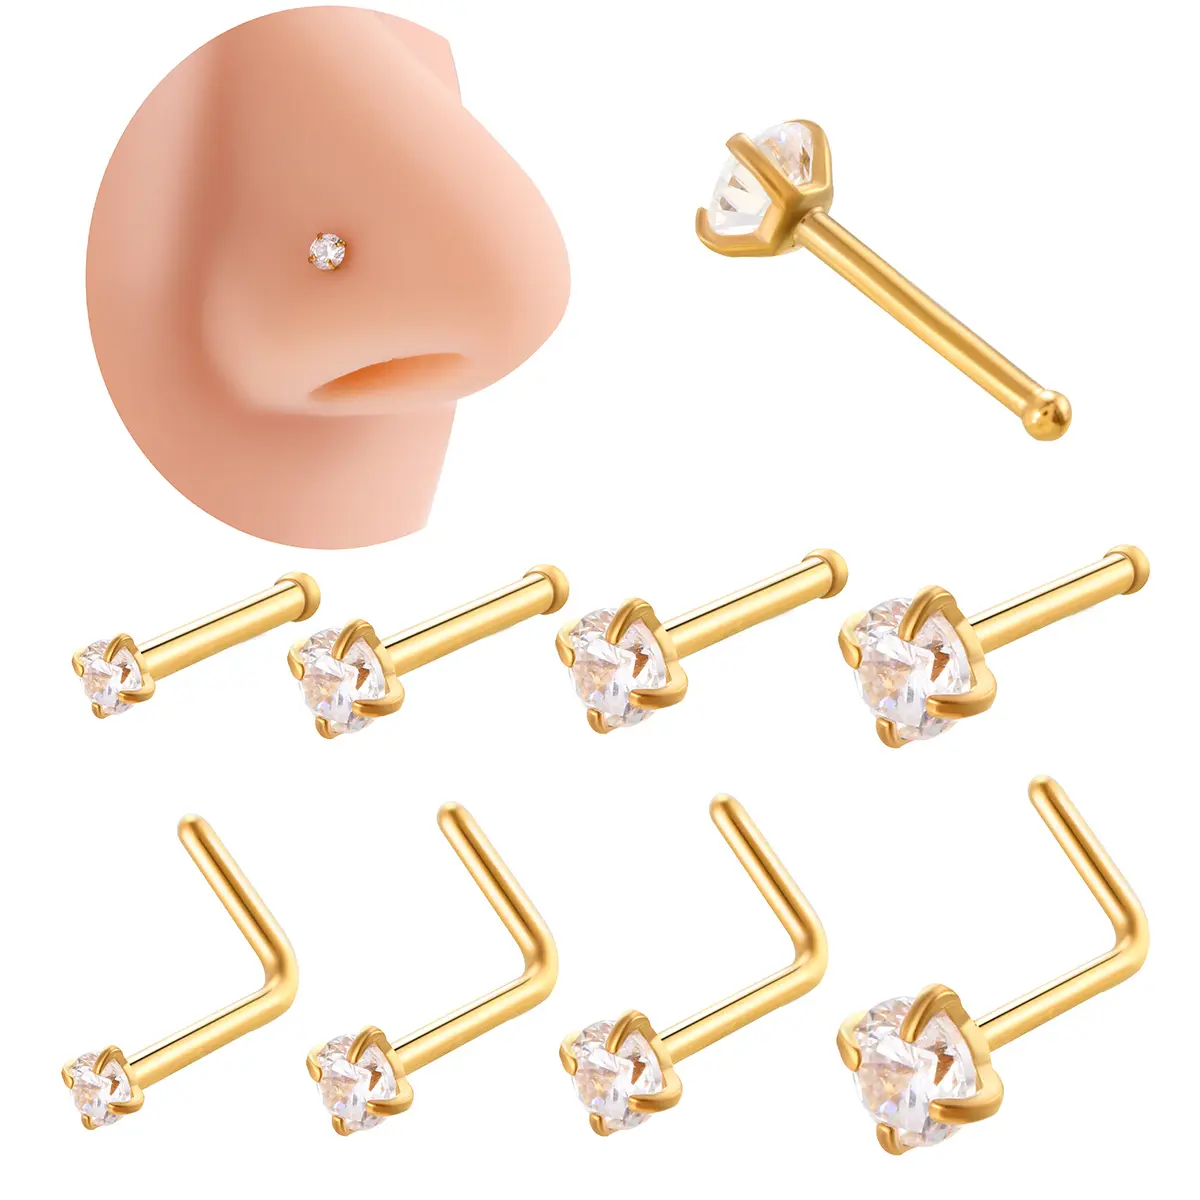 HENGSEN Mix Wholesale 20G Stainless Steel Nose Piercings Jewelry L shape Straight Single Zircon Nose Stud For Women